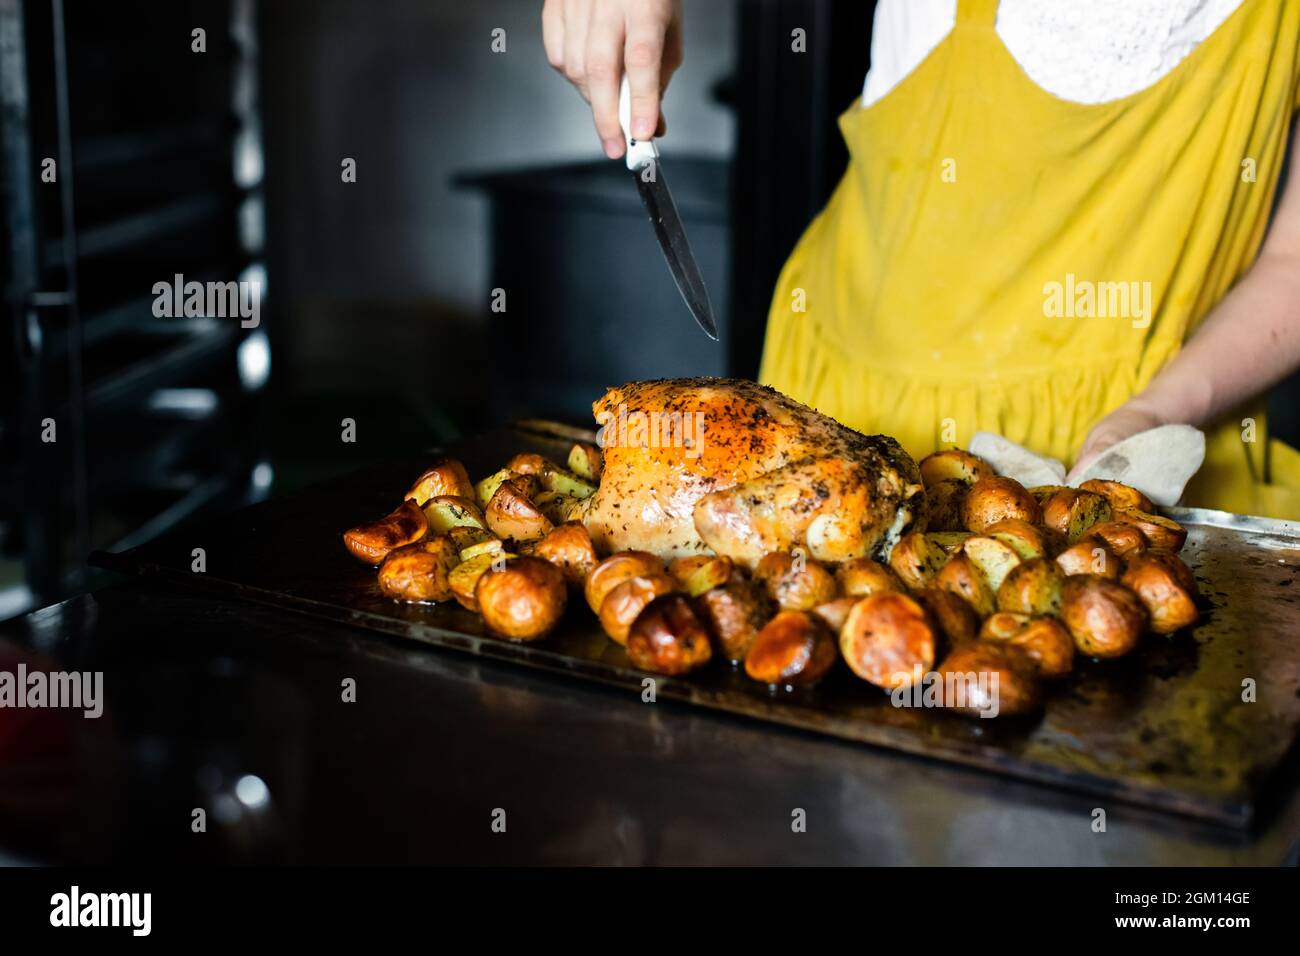 A woman cuts chicken with potatoes on a baking counter Stock Photo